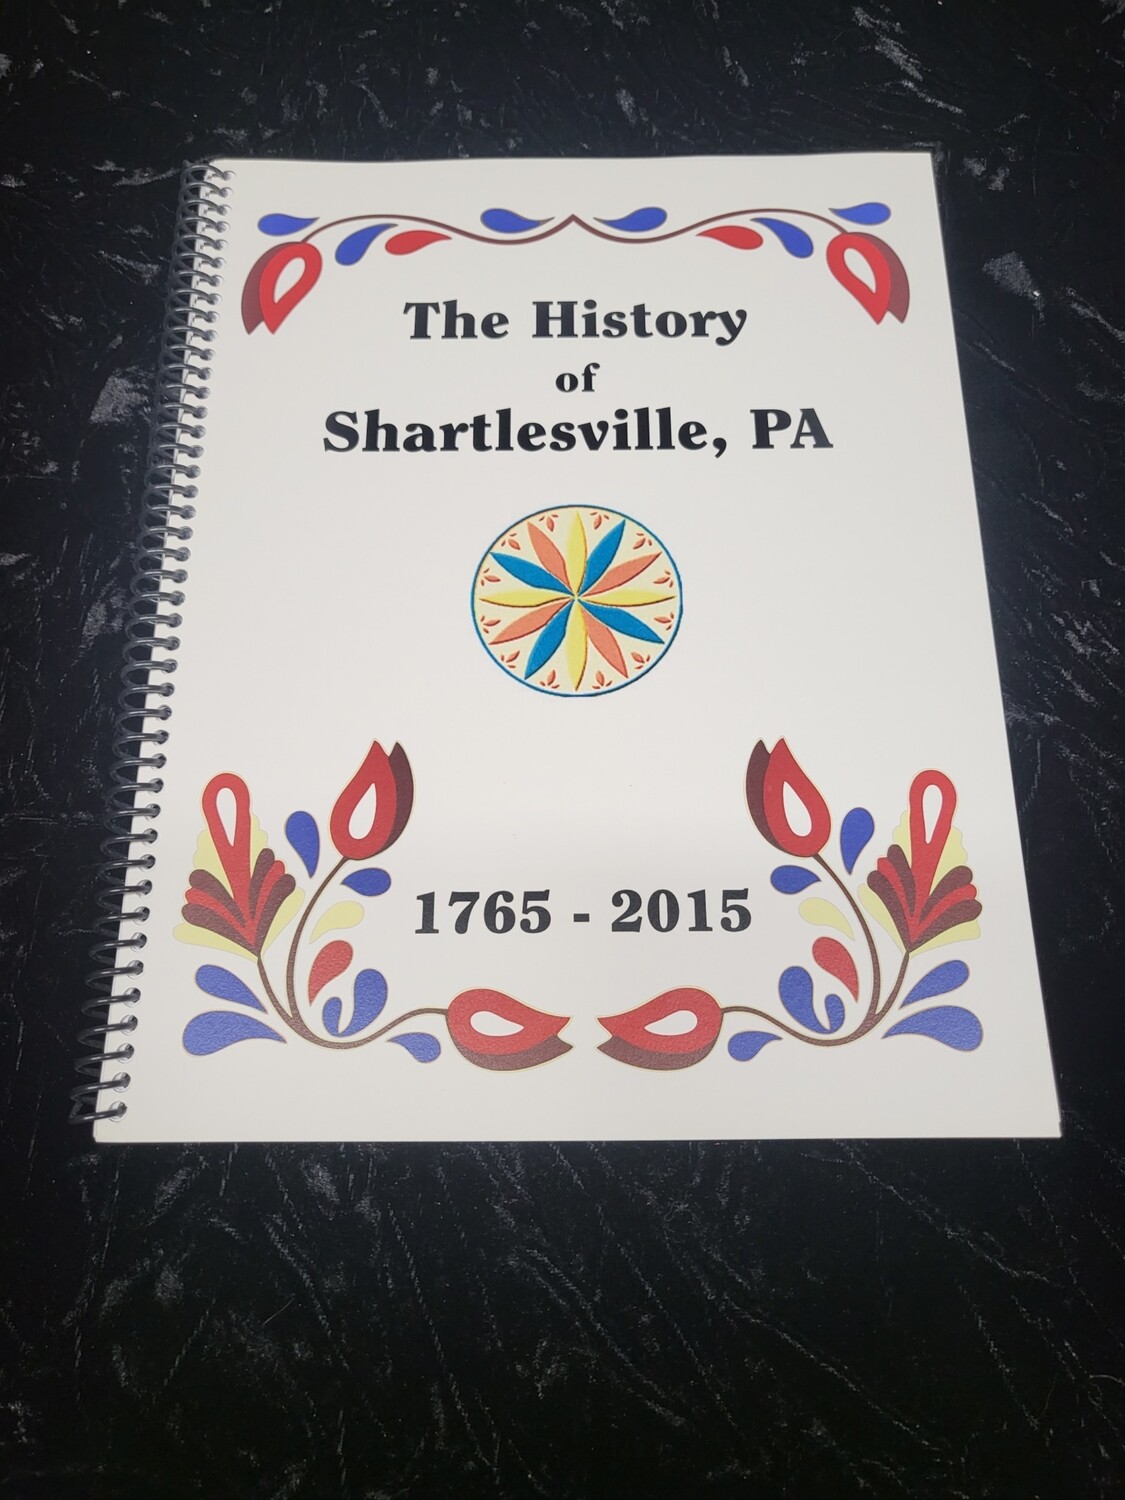 The History of Shartlesville, PA